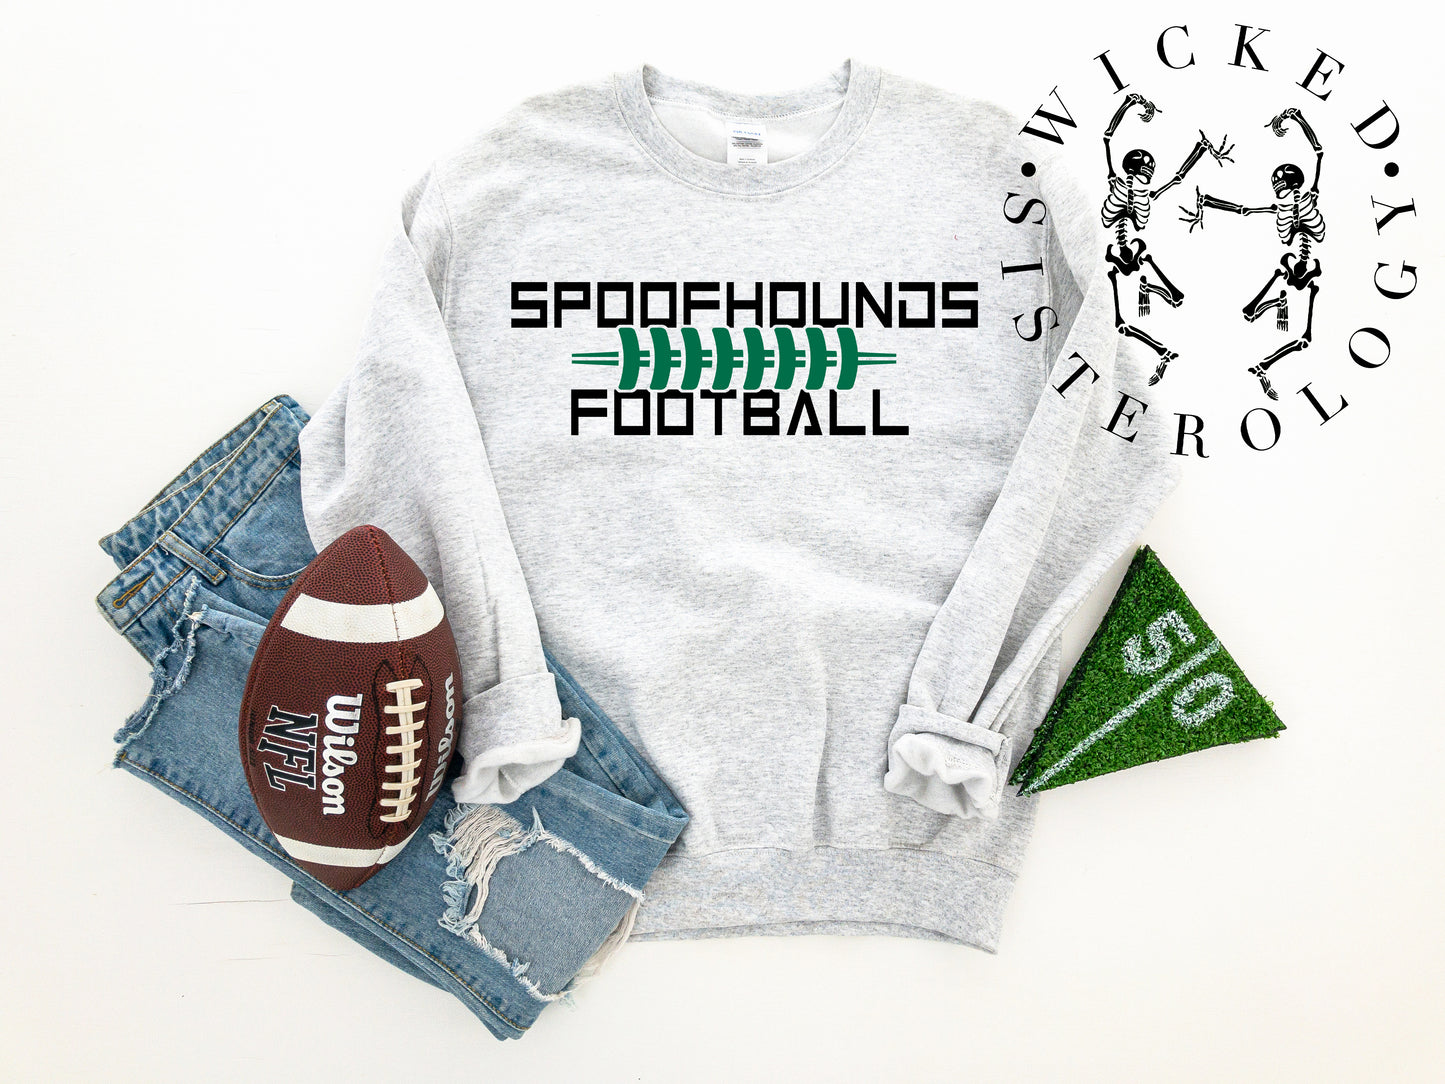 Spoofhounds Football